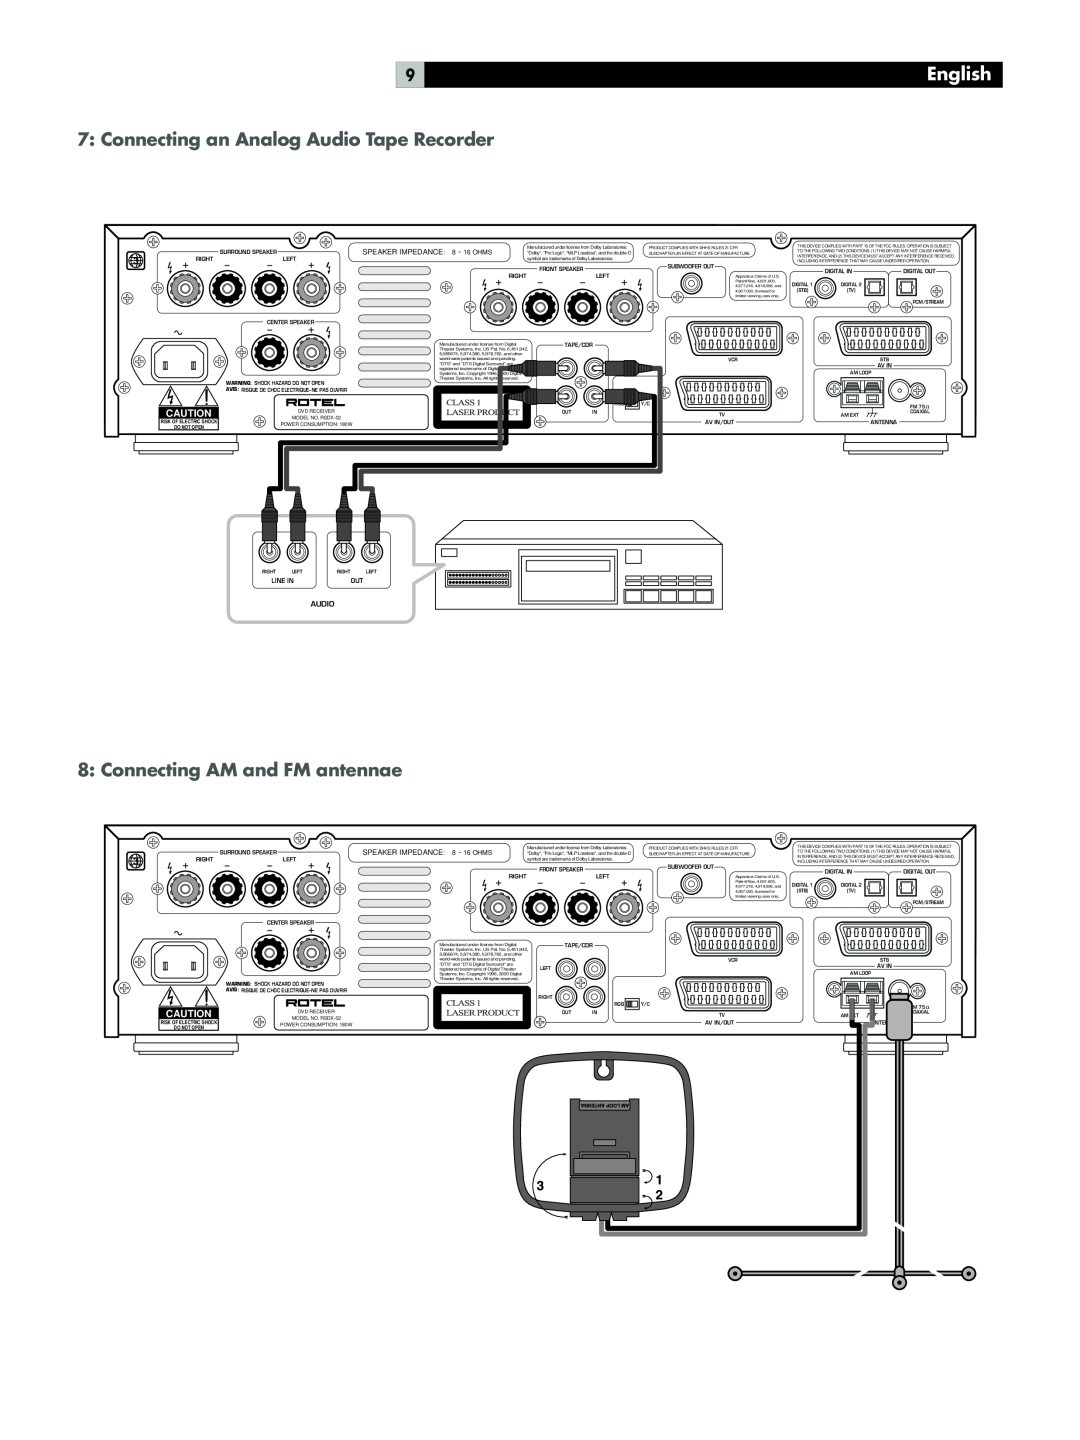 Rotel RSDX-02e Connecting an Analog Audio Tape Recorder, Connecting AM and FM antennae, English, Line In, Do Not Open 